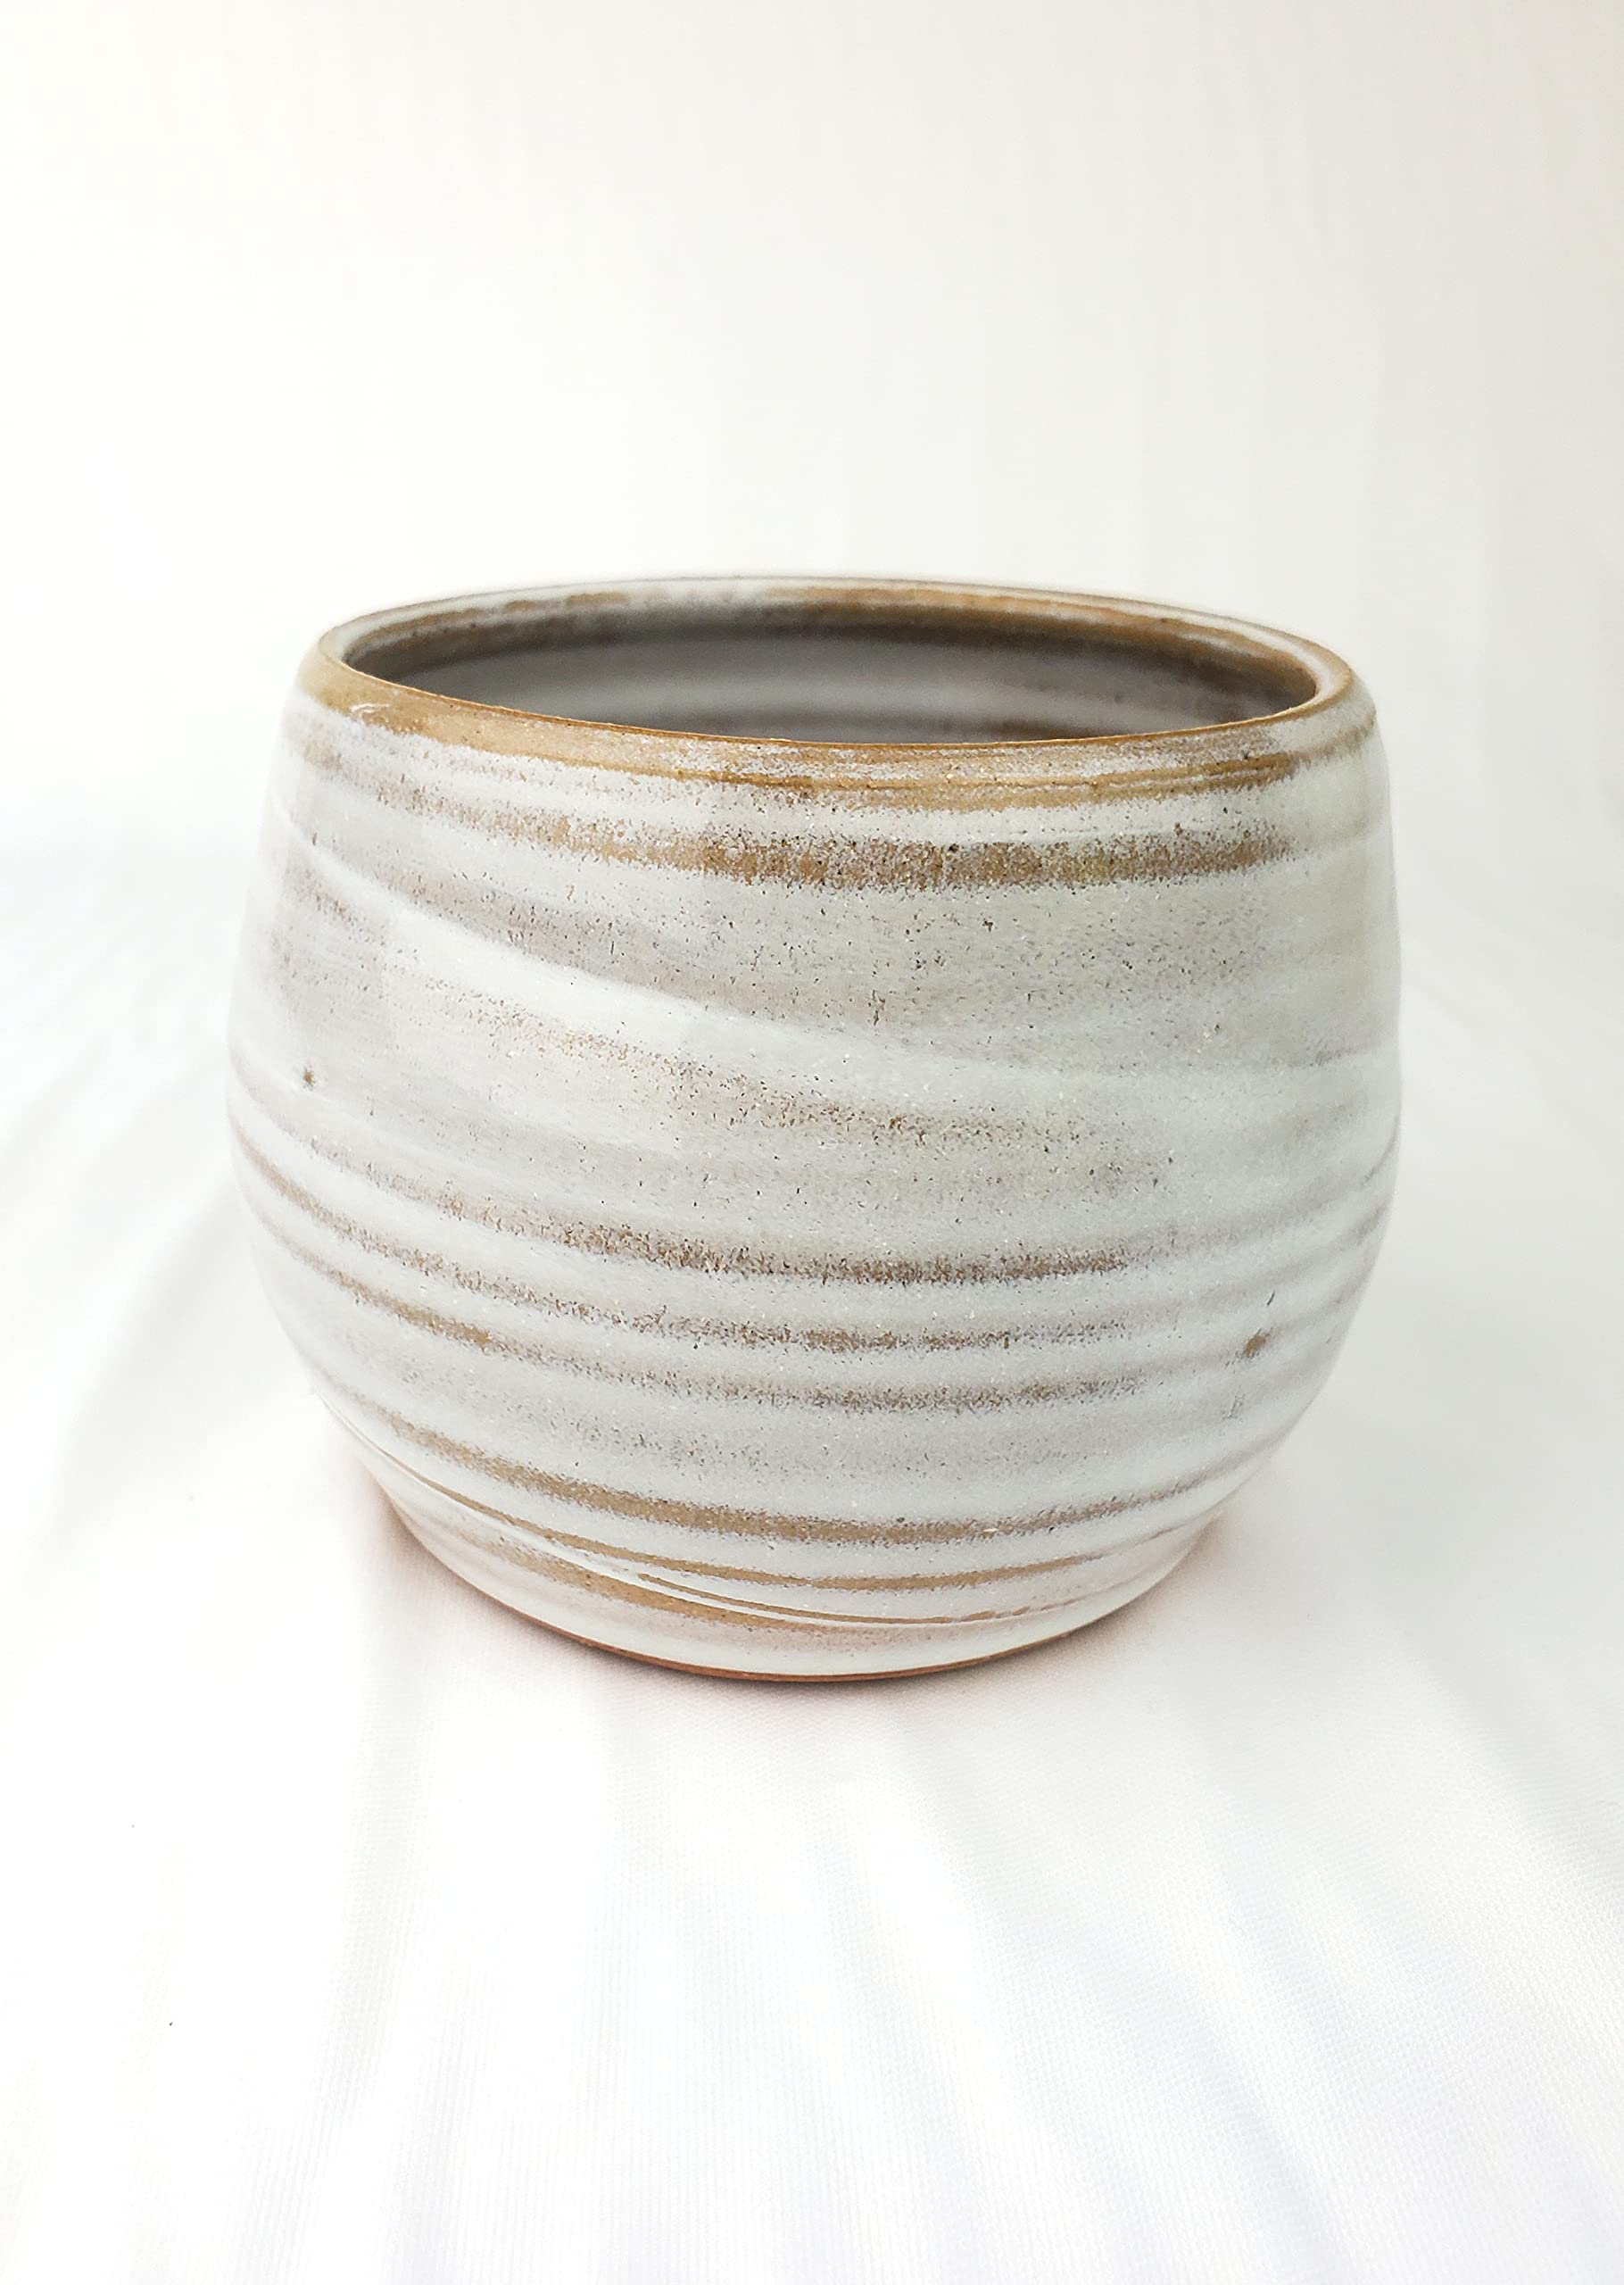 Hand Thrown Pottery Stemless Wine Glass or Drinking Cup in Shale Handmade in North Carolina